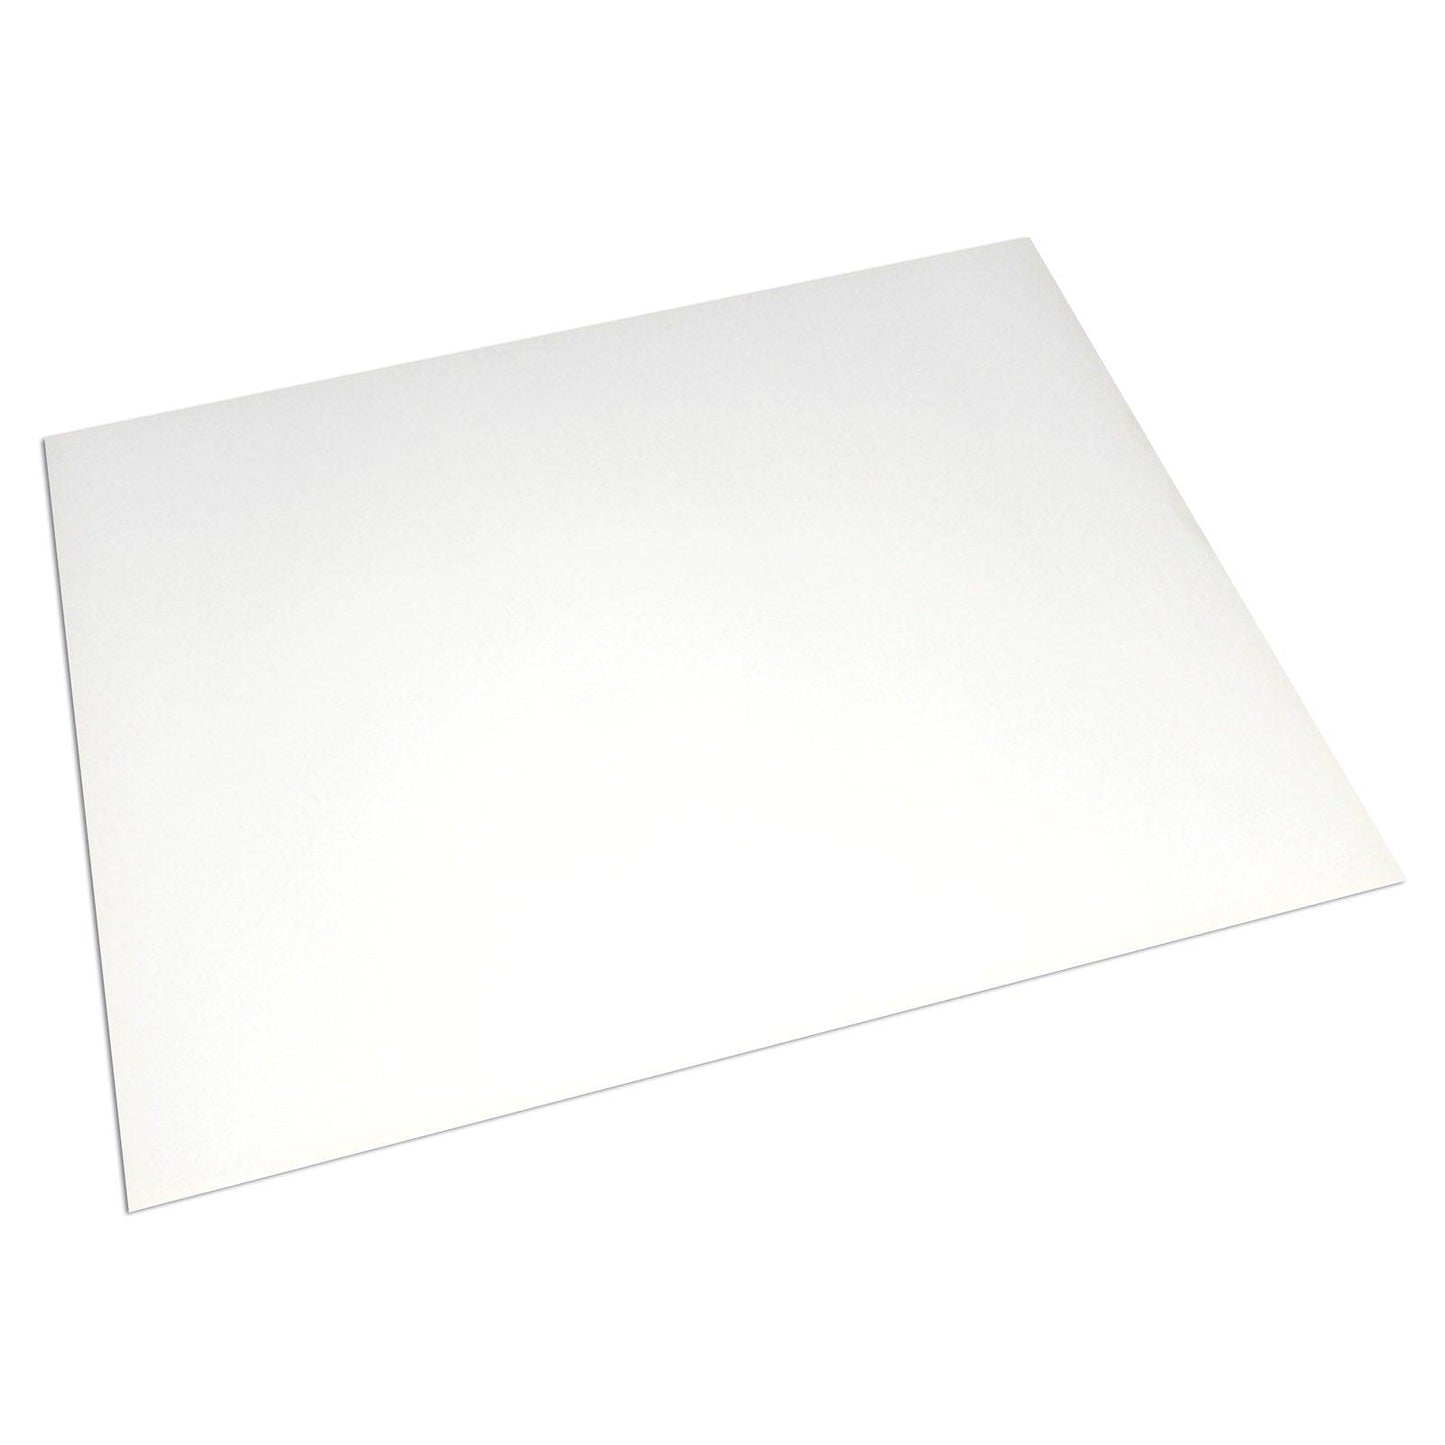 Poster Board, White 10pt., 14" x 22", 100 Sheets - Loomini